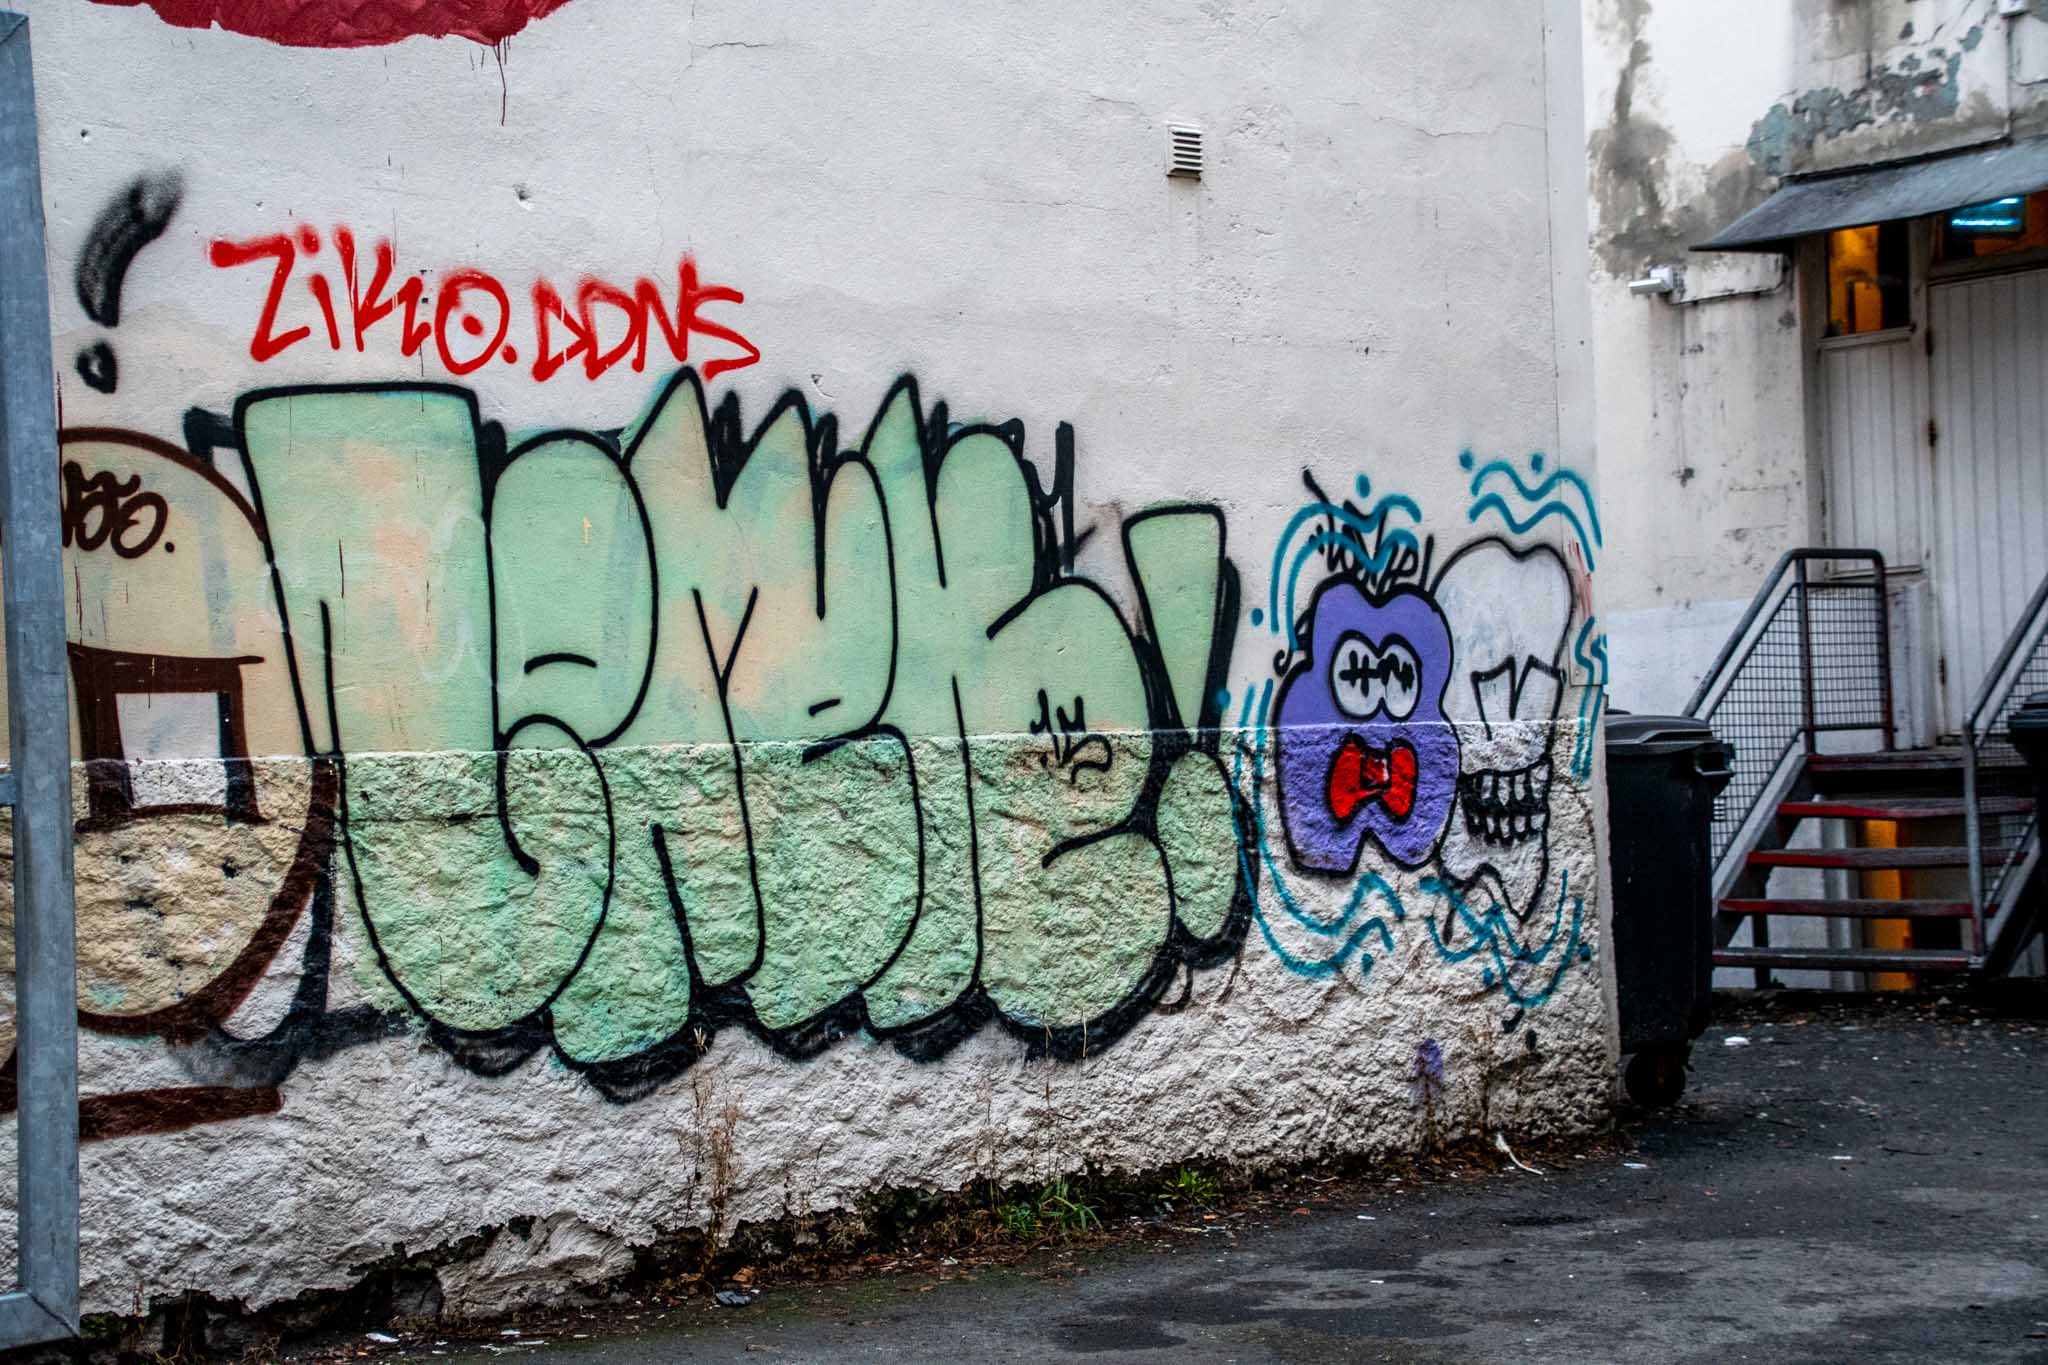 The street art movement began with basic tagging in Reykjavik